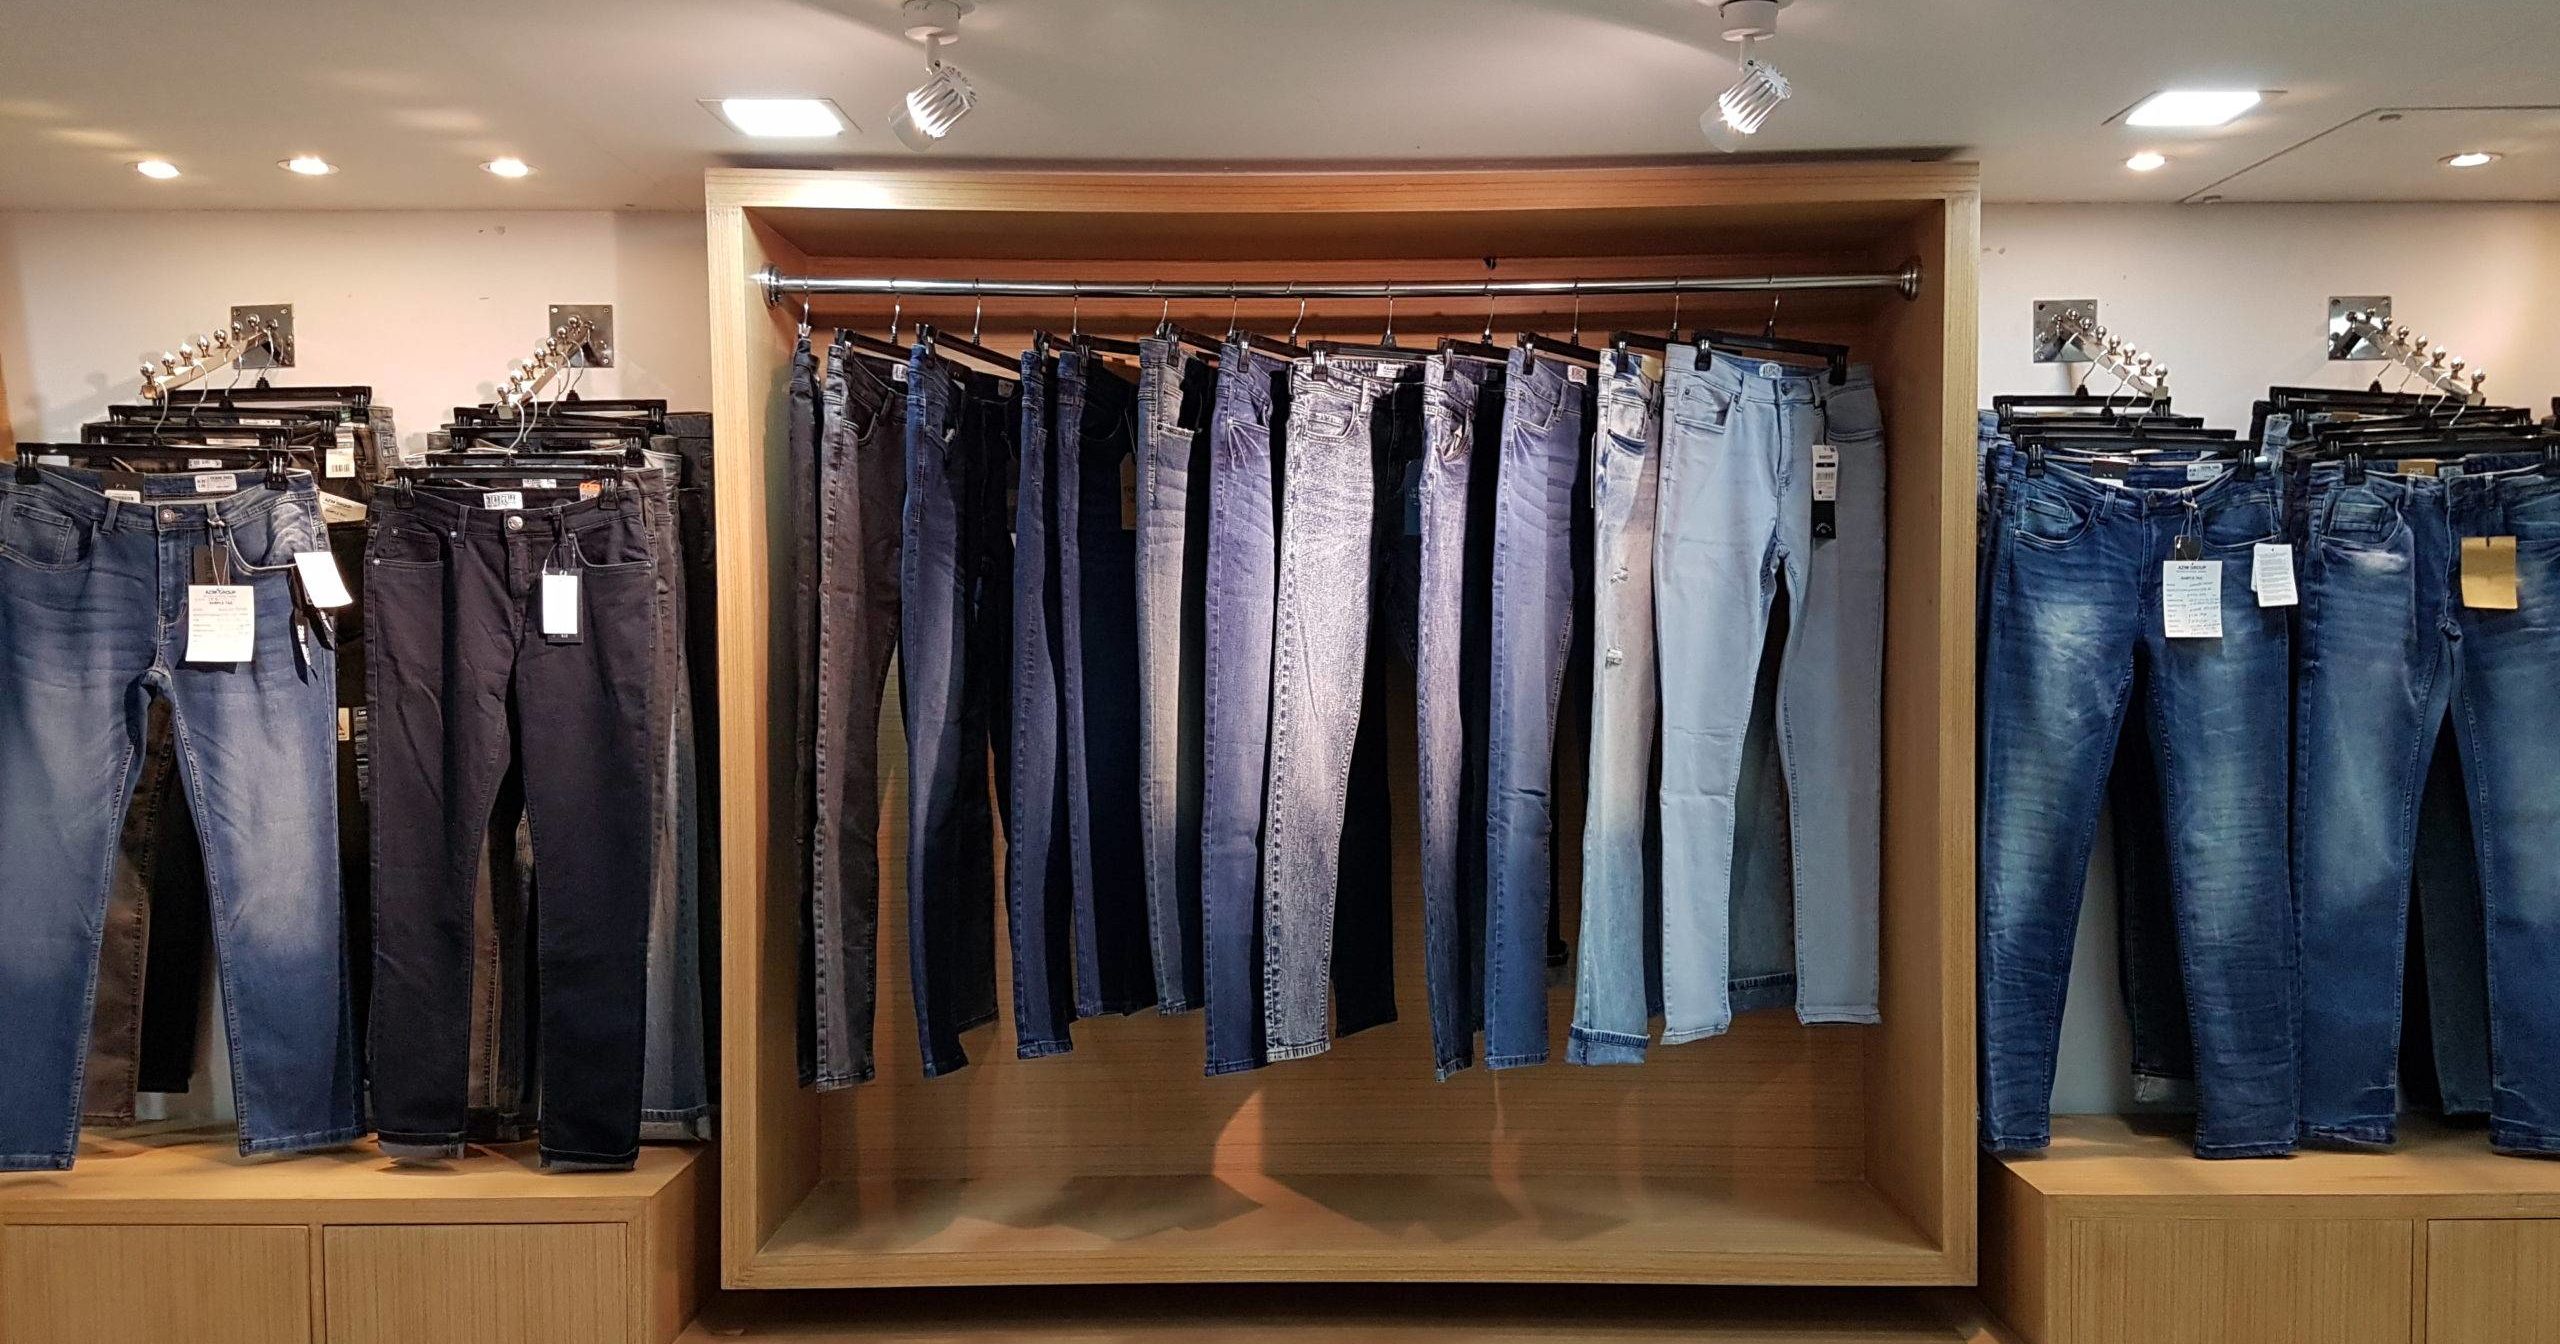 A collection of denim jeans